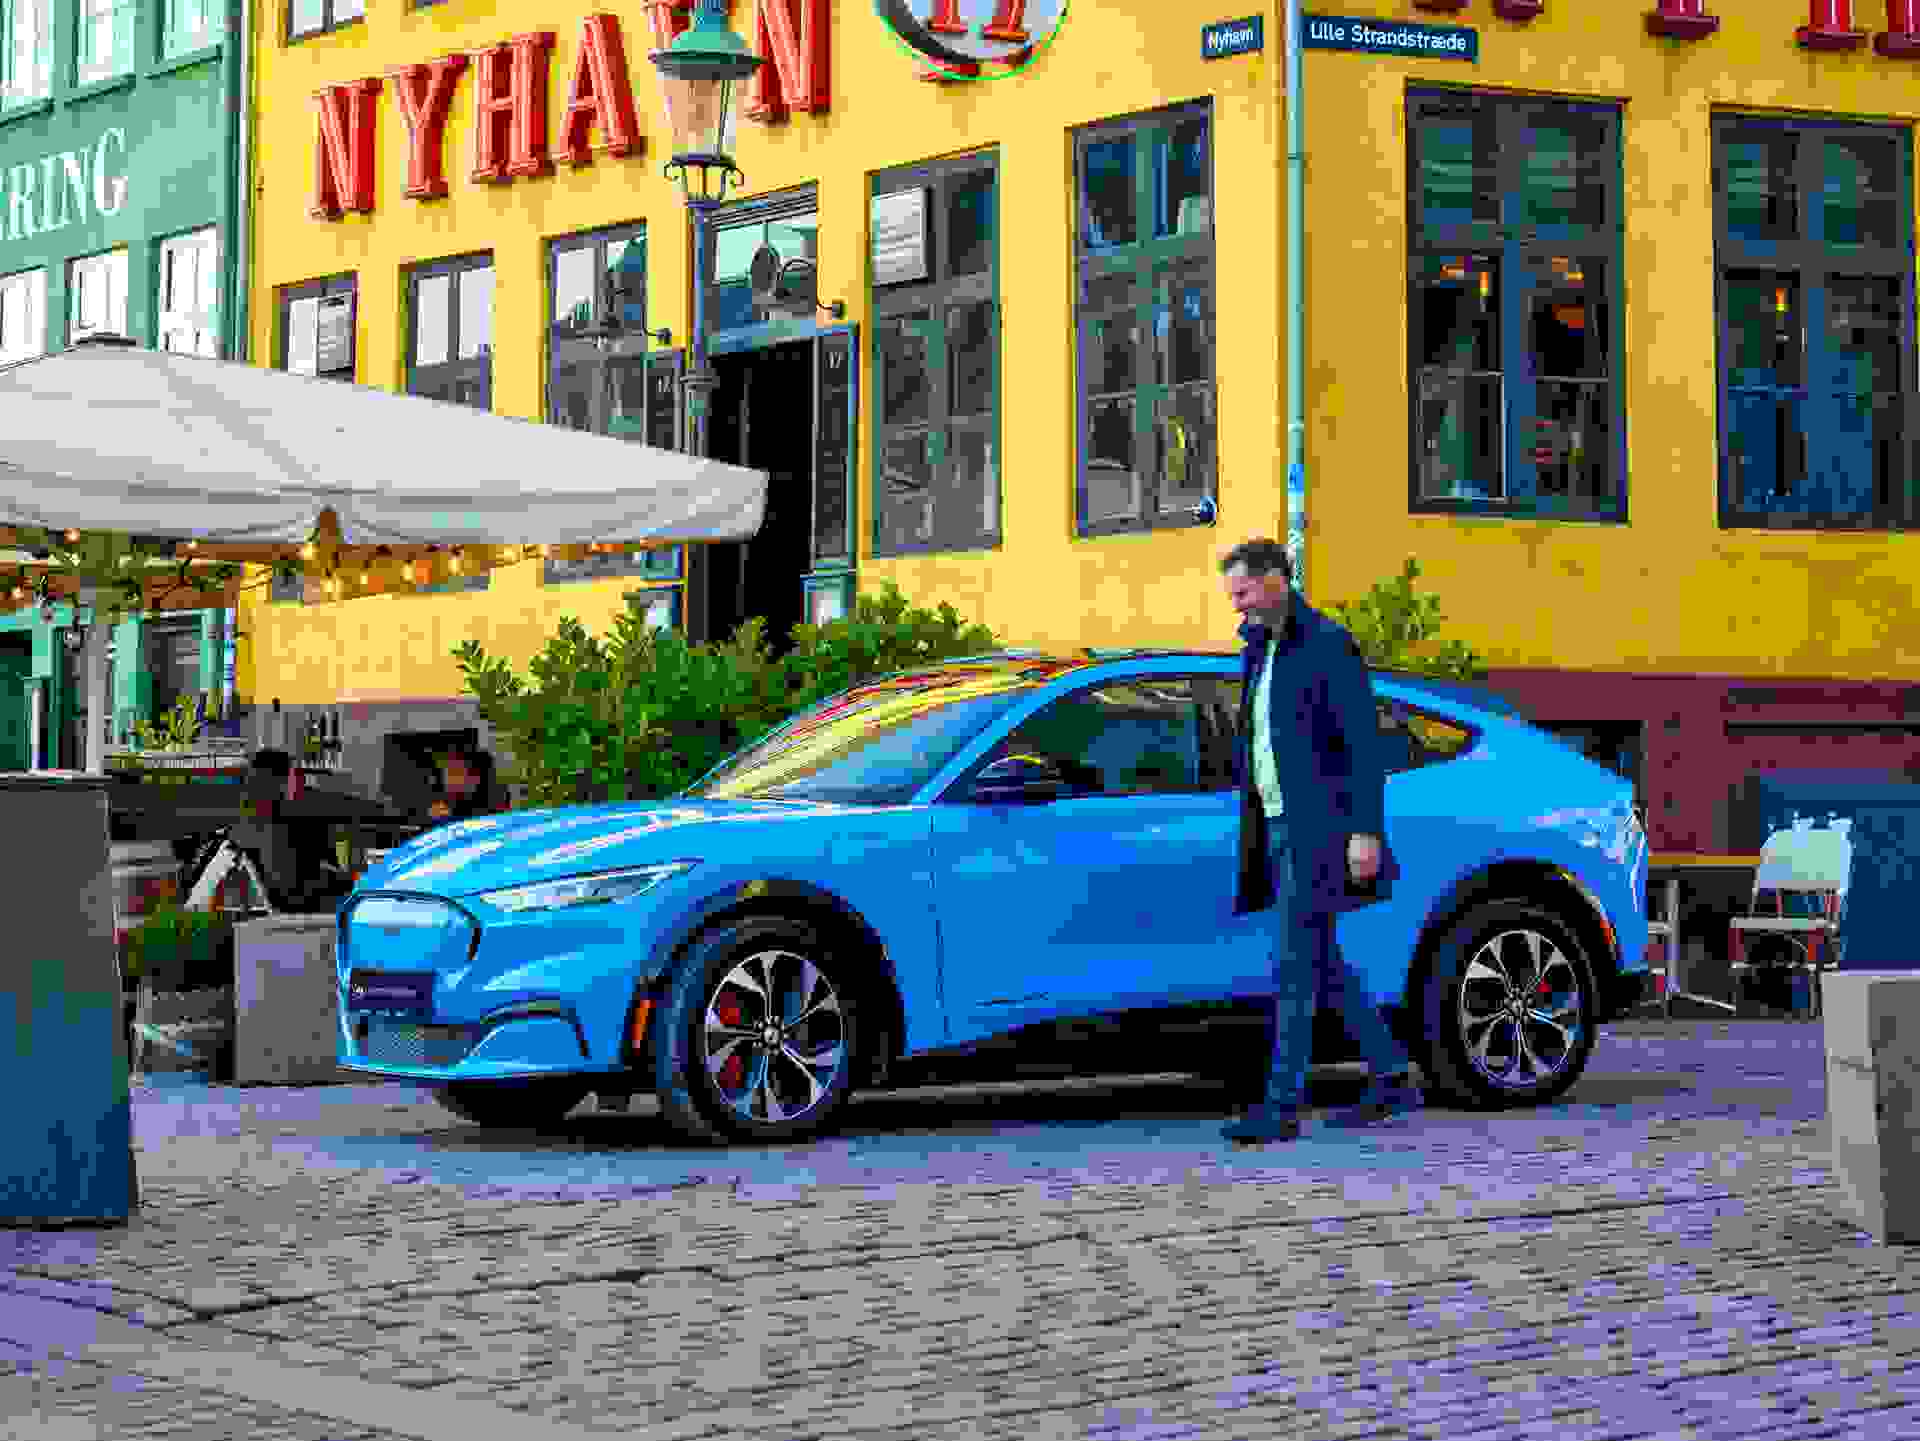 Blue Ford Mustang Mach E Drivers Side Parked At Nyhavn Owner Entering Lightened